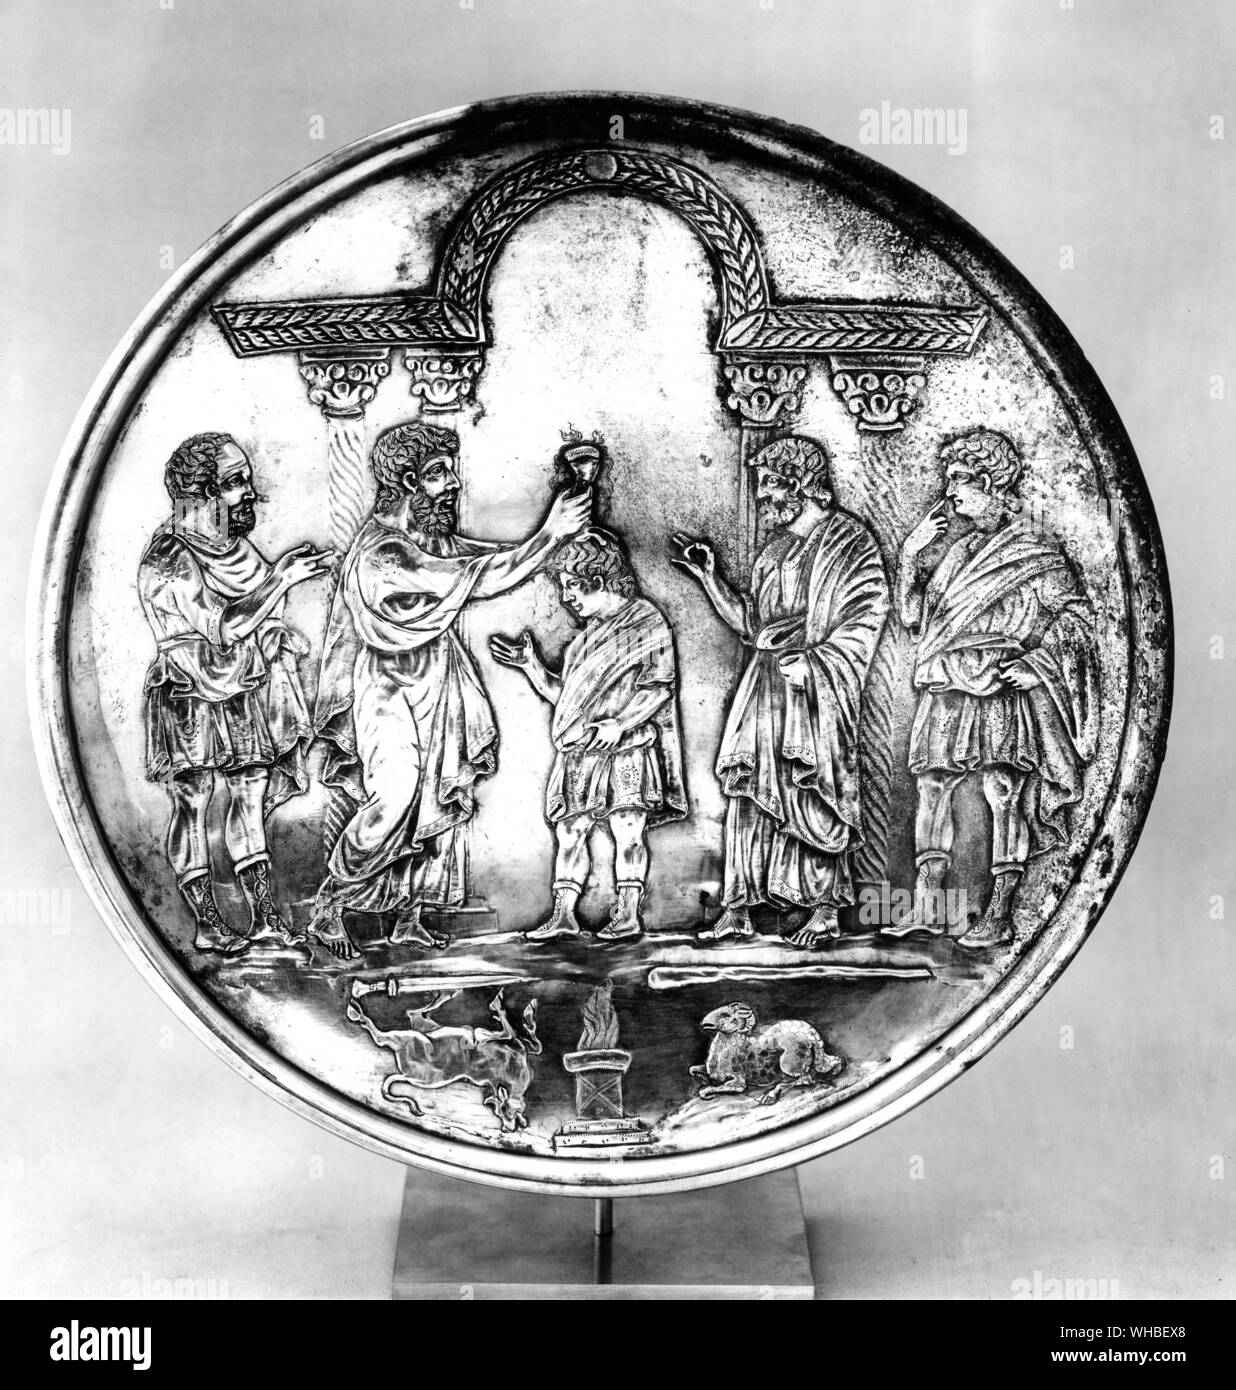 Metalwork - silver - early VII century (610-630) - Disk, David anointed King by Samuel. Stock Photo